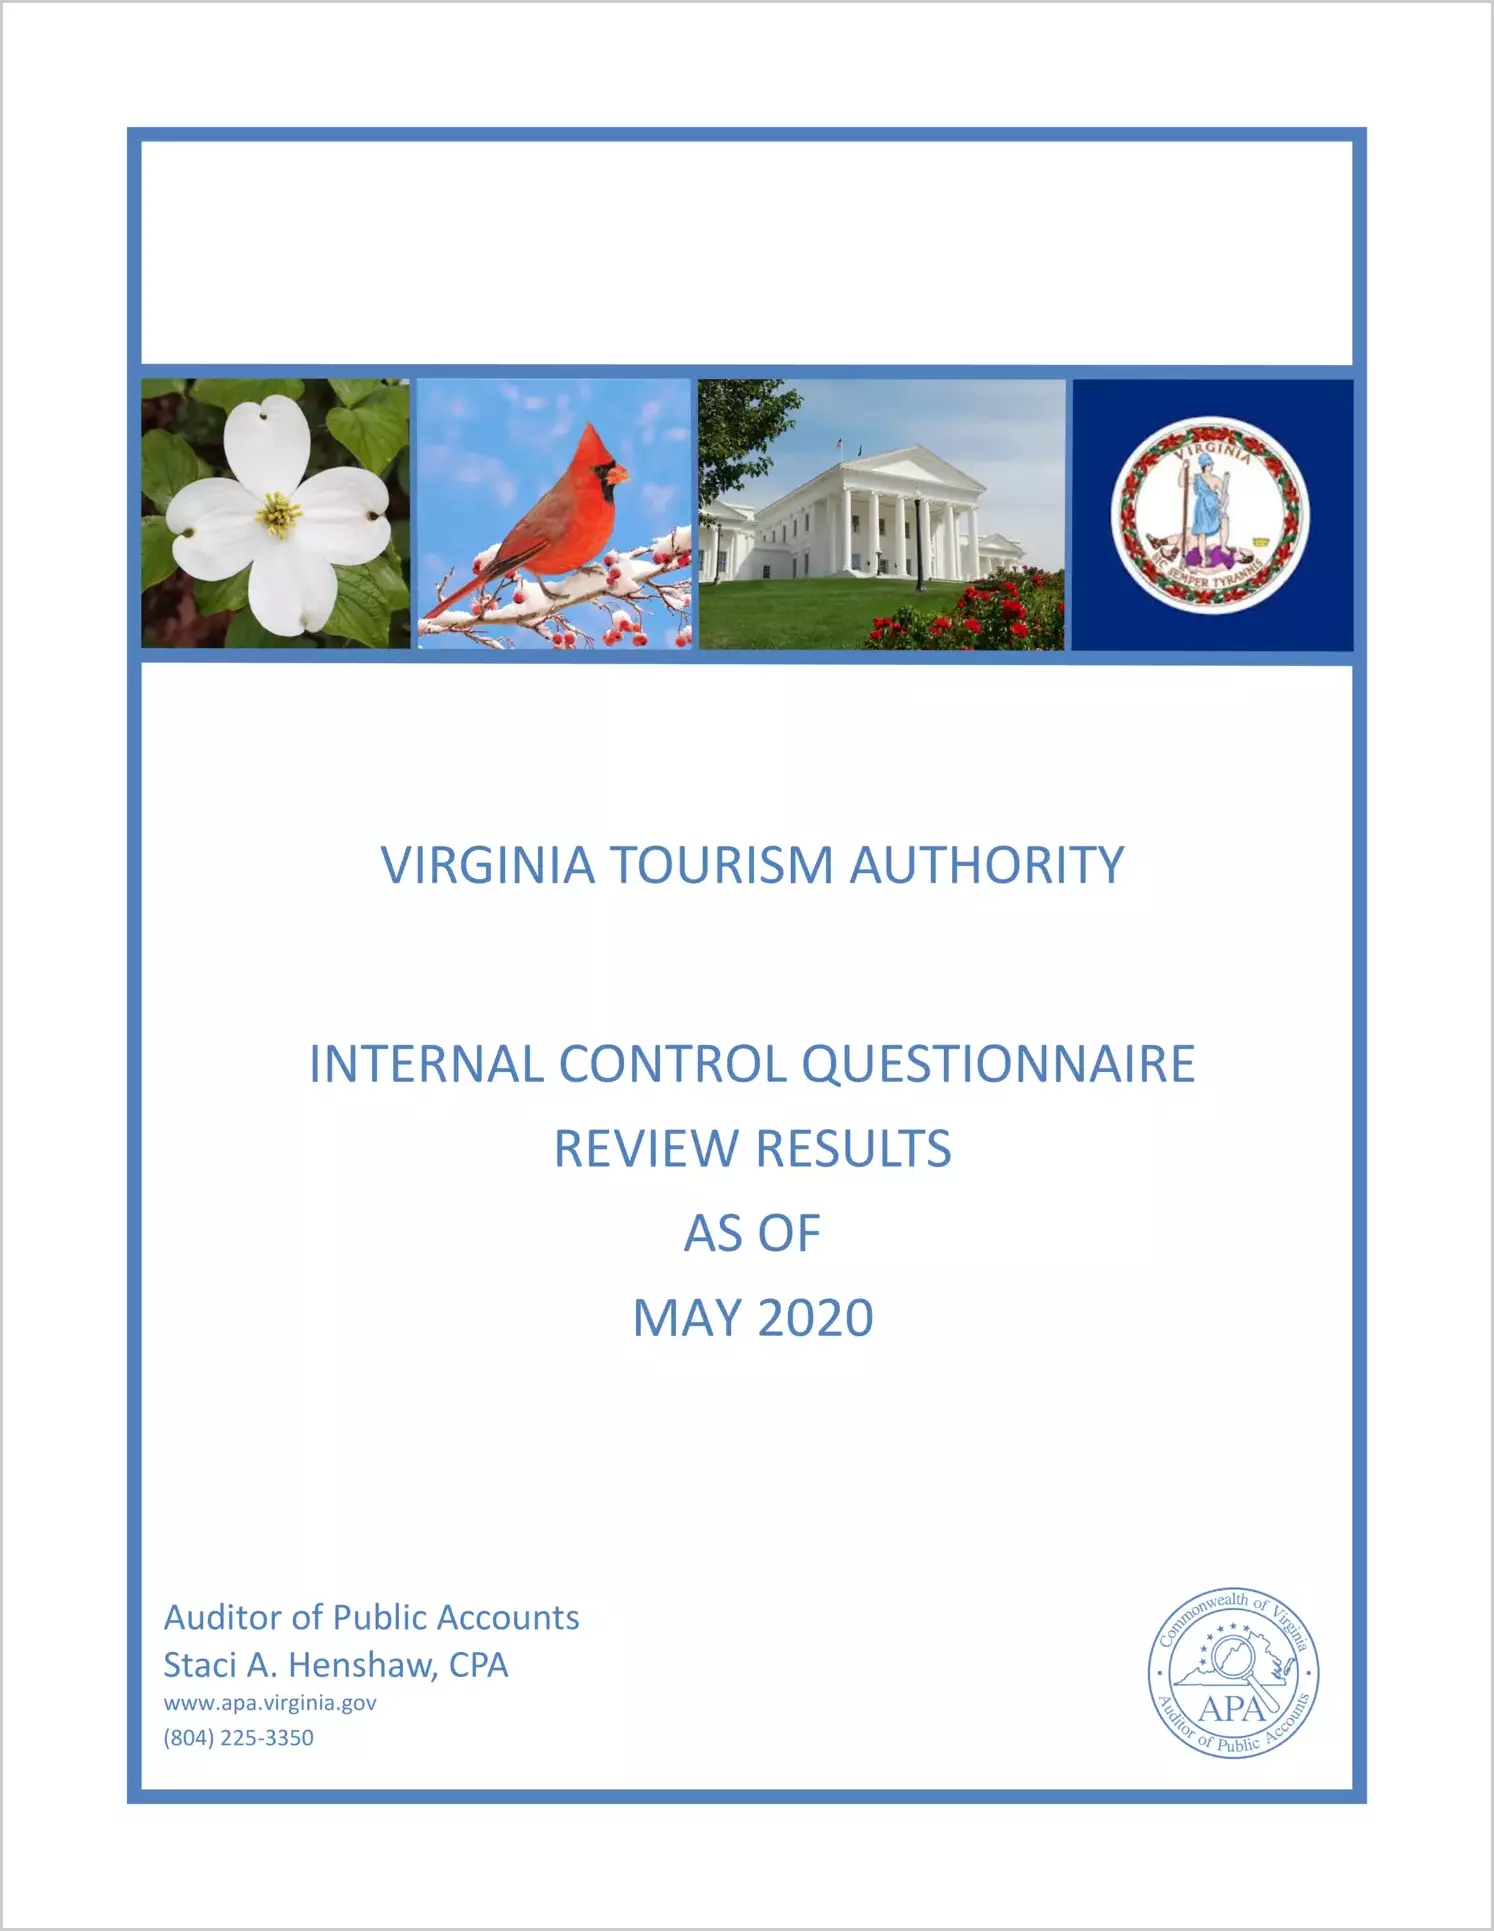 Virginia Tourism Authority Internal Control Questionnaire Review Results as of May 2020